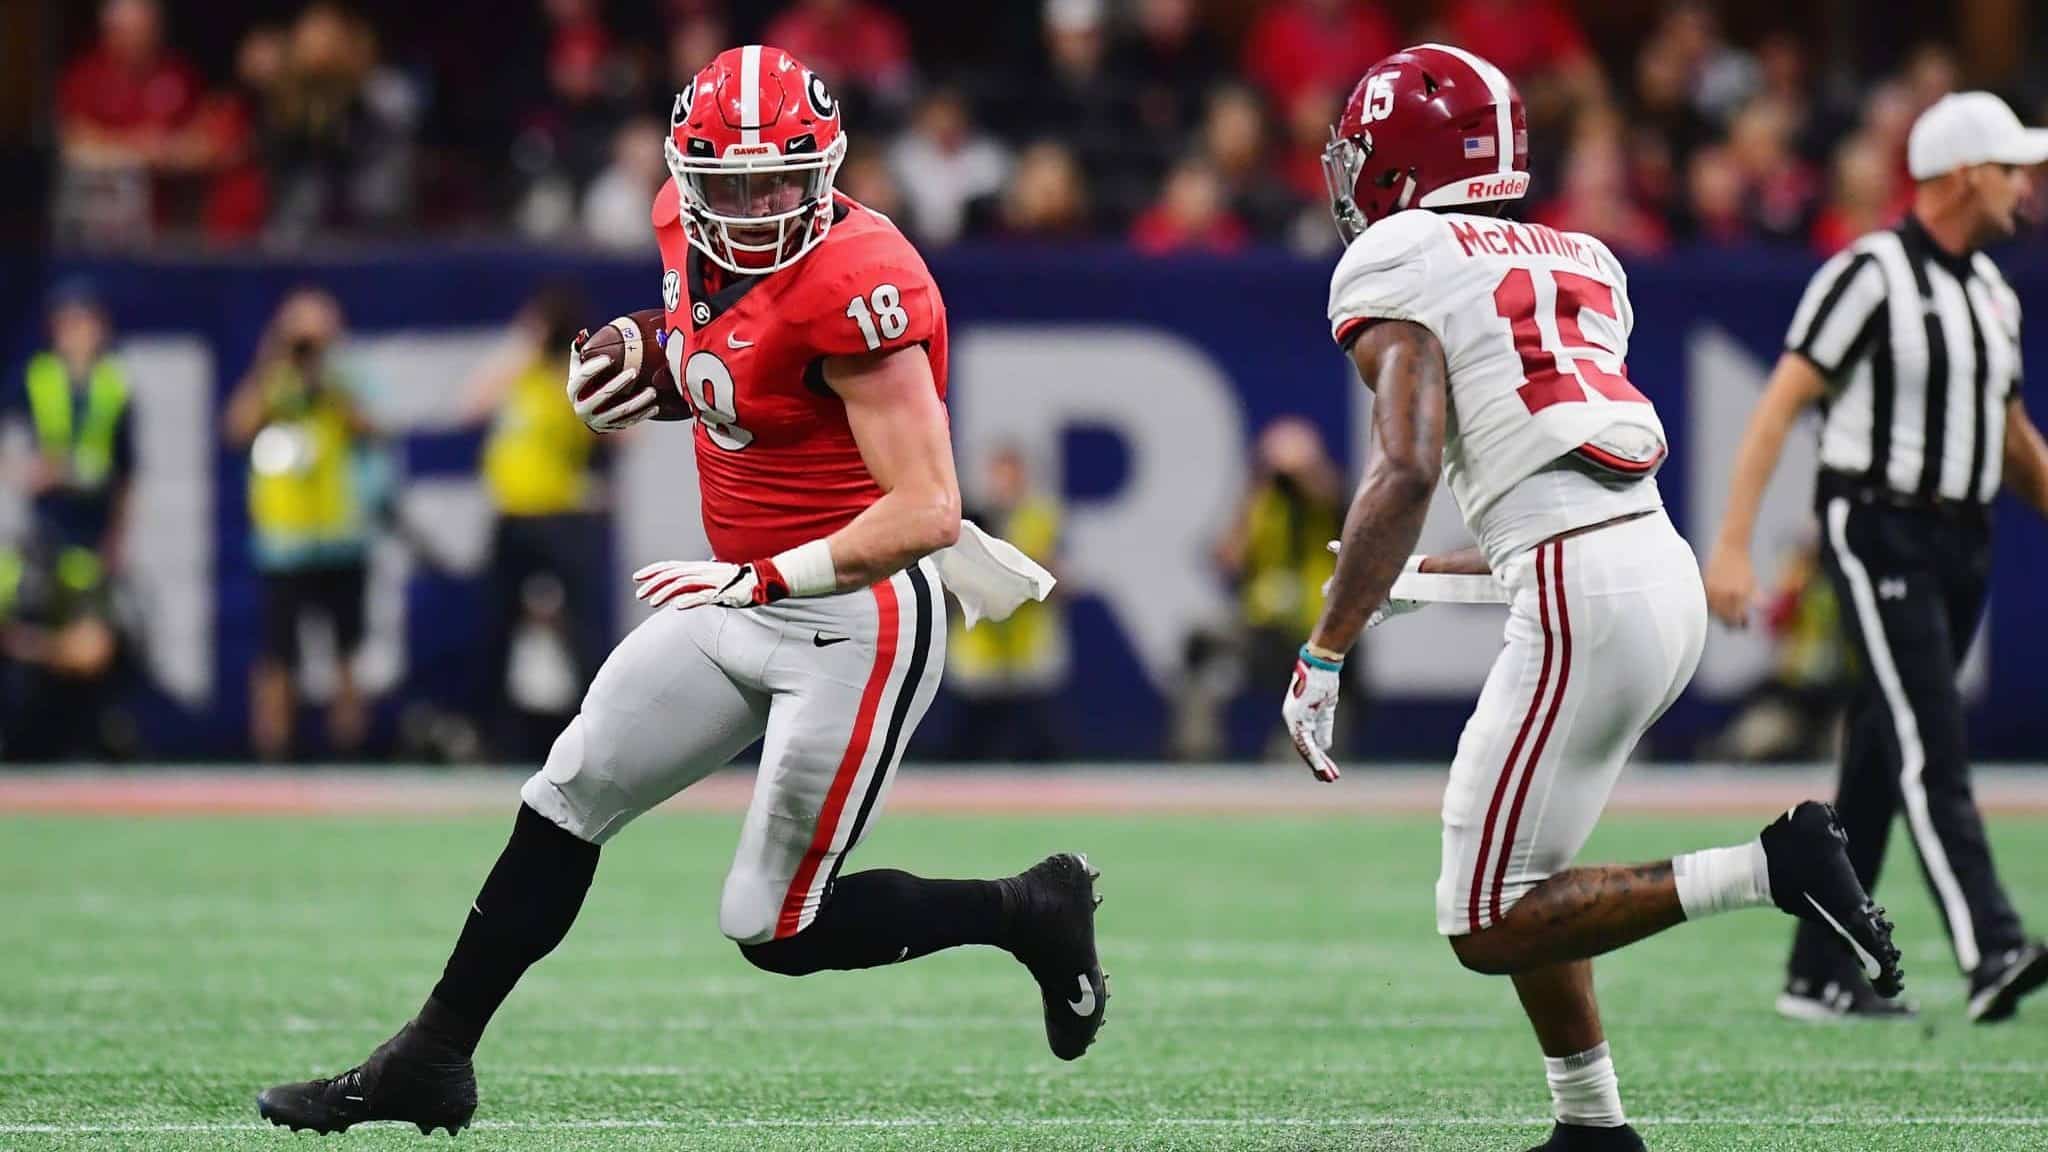 ATLANTA, GA - DECEMBER 01: Isaac Nauta #18 of the Georgia Bulldogs runs with the ball against Xavier McKinney #15 of the Alabama Crimson Tide in the first half during the 2018 SEC Championship Game at Mercedes-Benz Stadium on December 1, 2018 in Atlanta, Georgia.